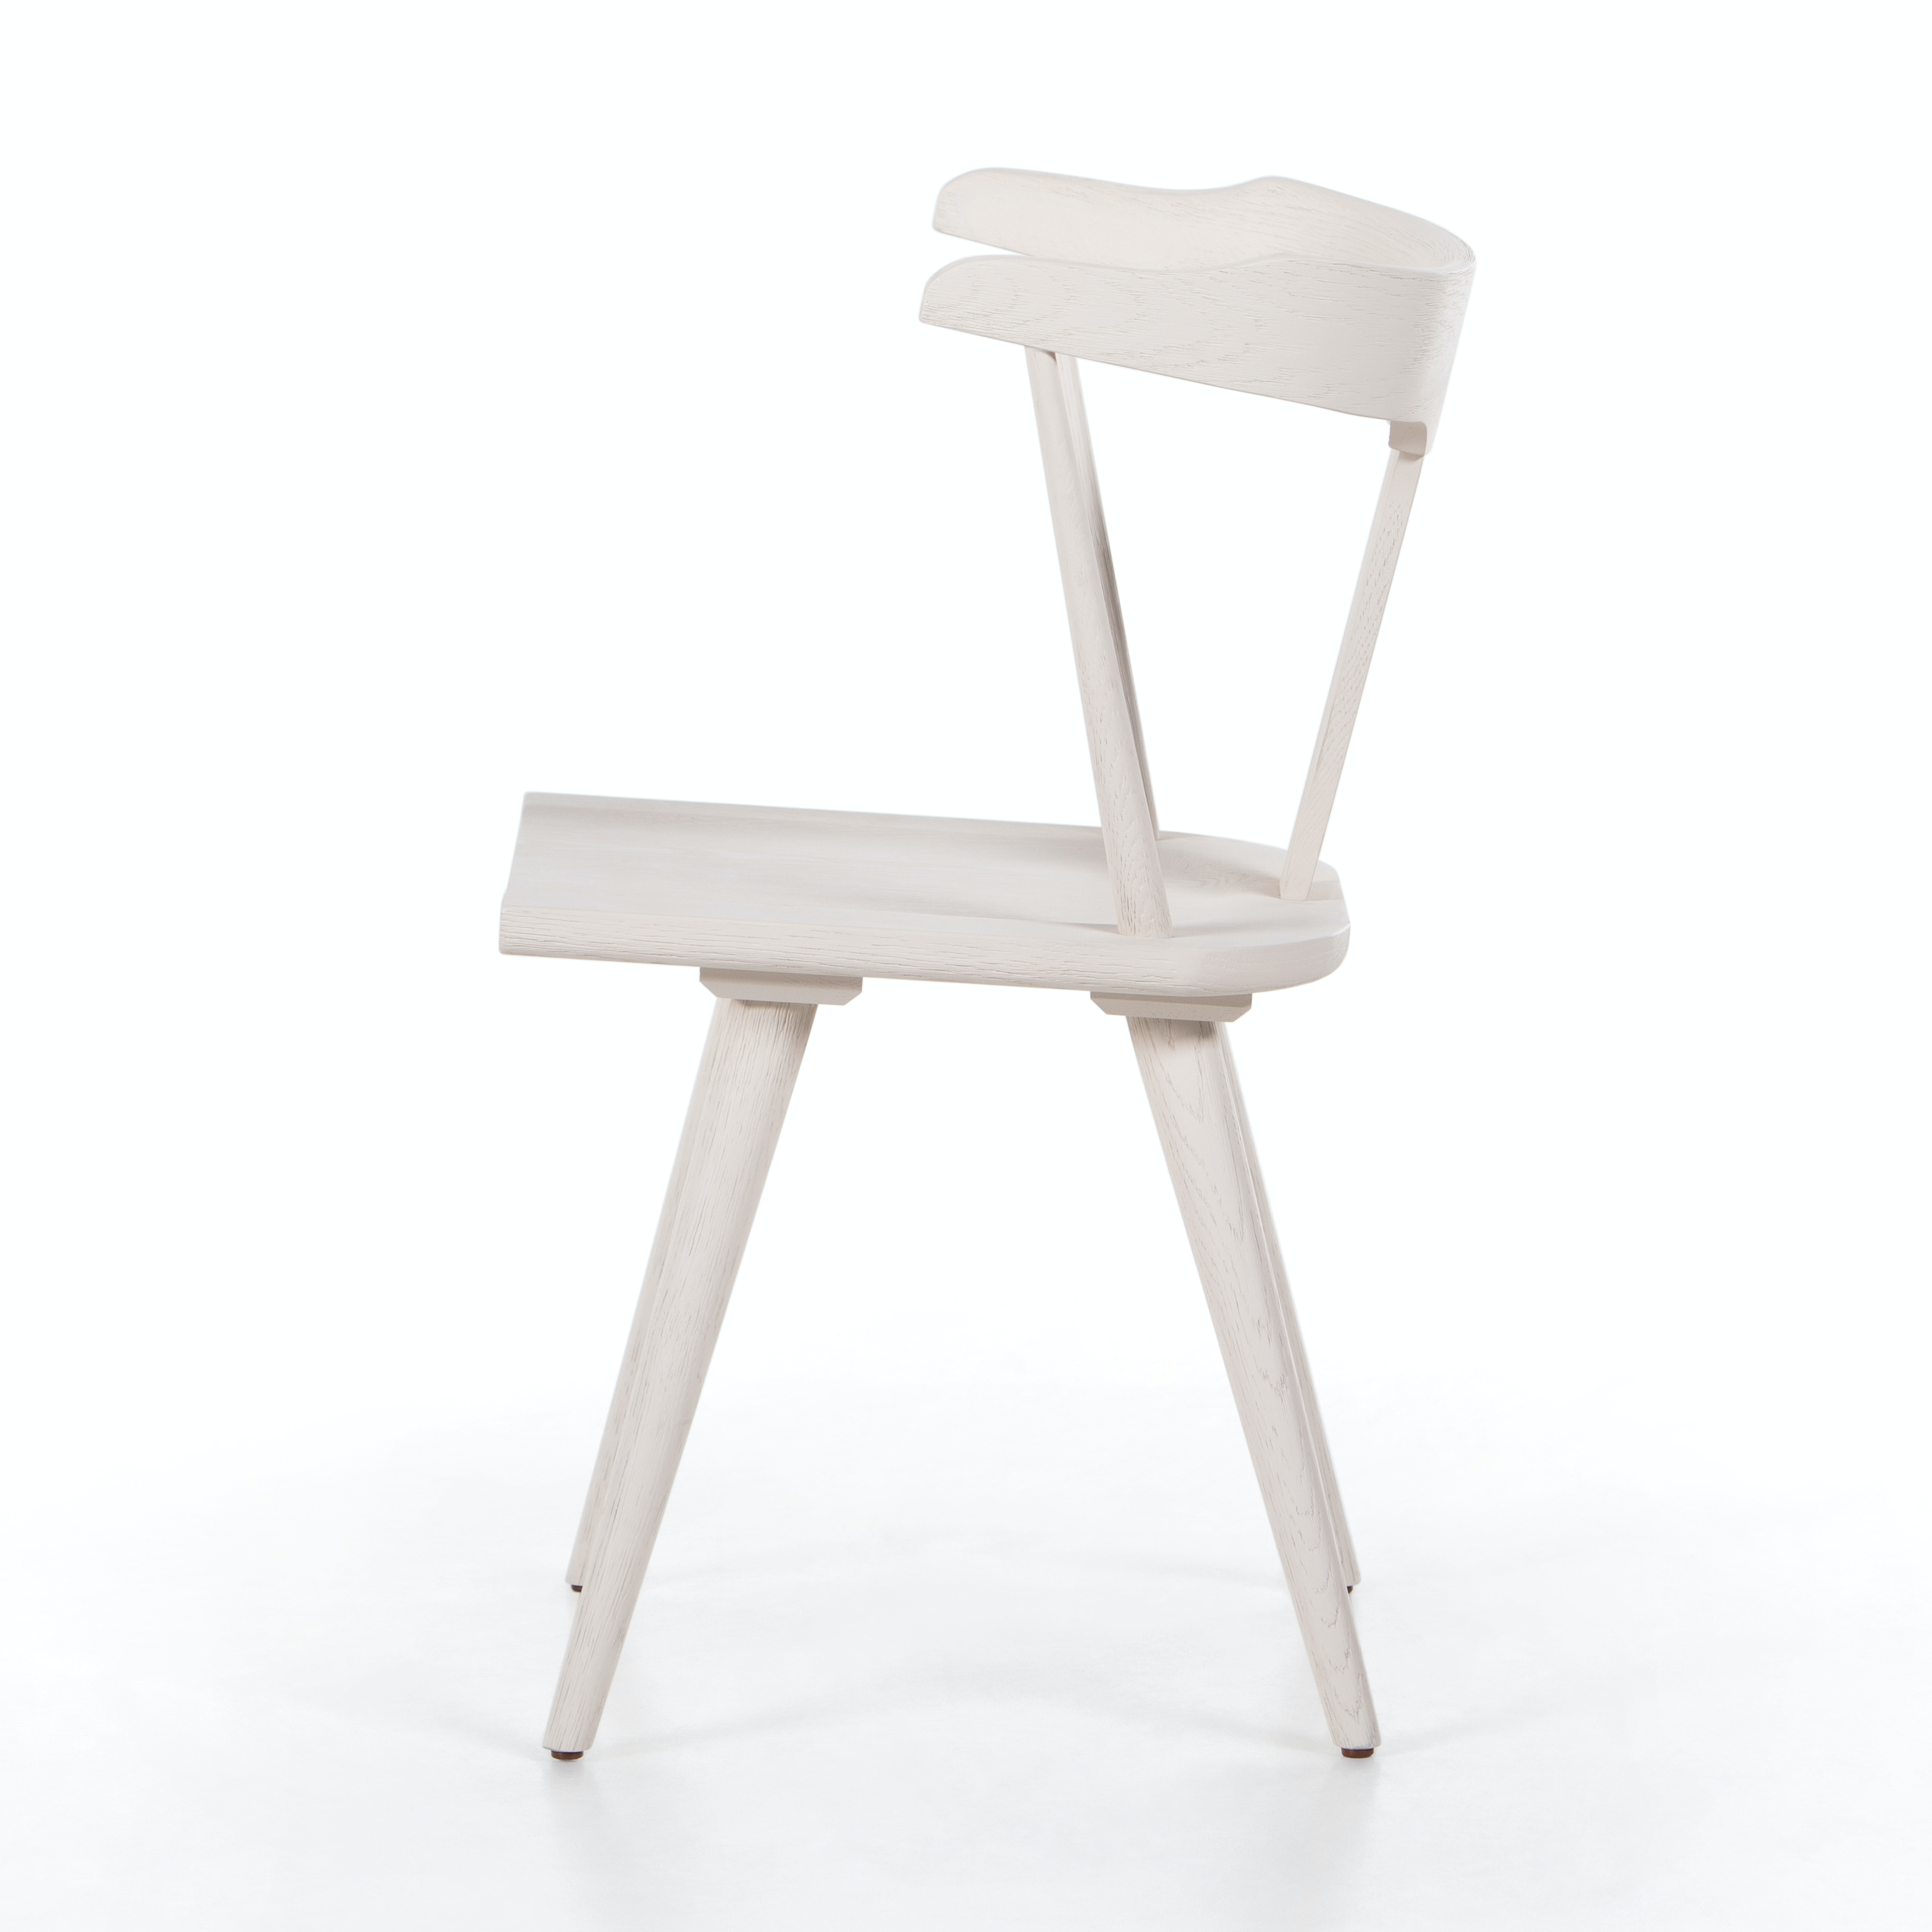 This new take on the mid-century Windsor chair, the Ripley Off White Dining Chair has a bowed, sculptural silhouette. The dining chair is done in an off-white finish to highlight the natural grain of weathered oak. Amethyst Home provides interior design, new construction, custom furniture, and rugs for the Winter Park, Florida metro area.